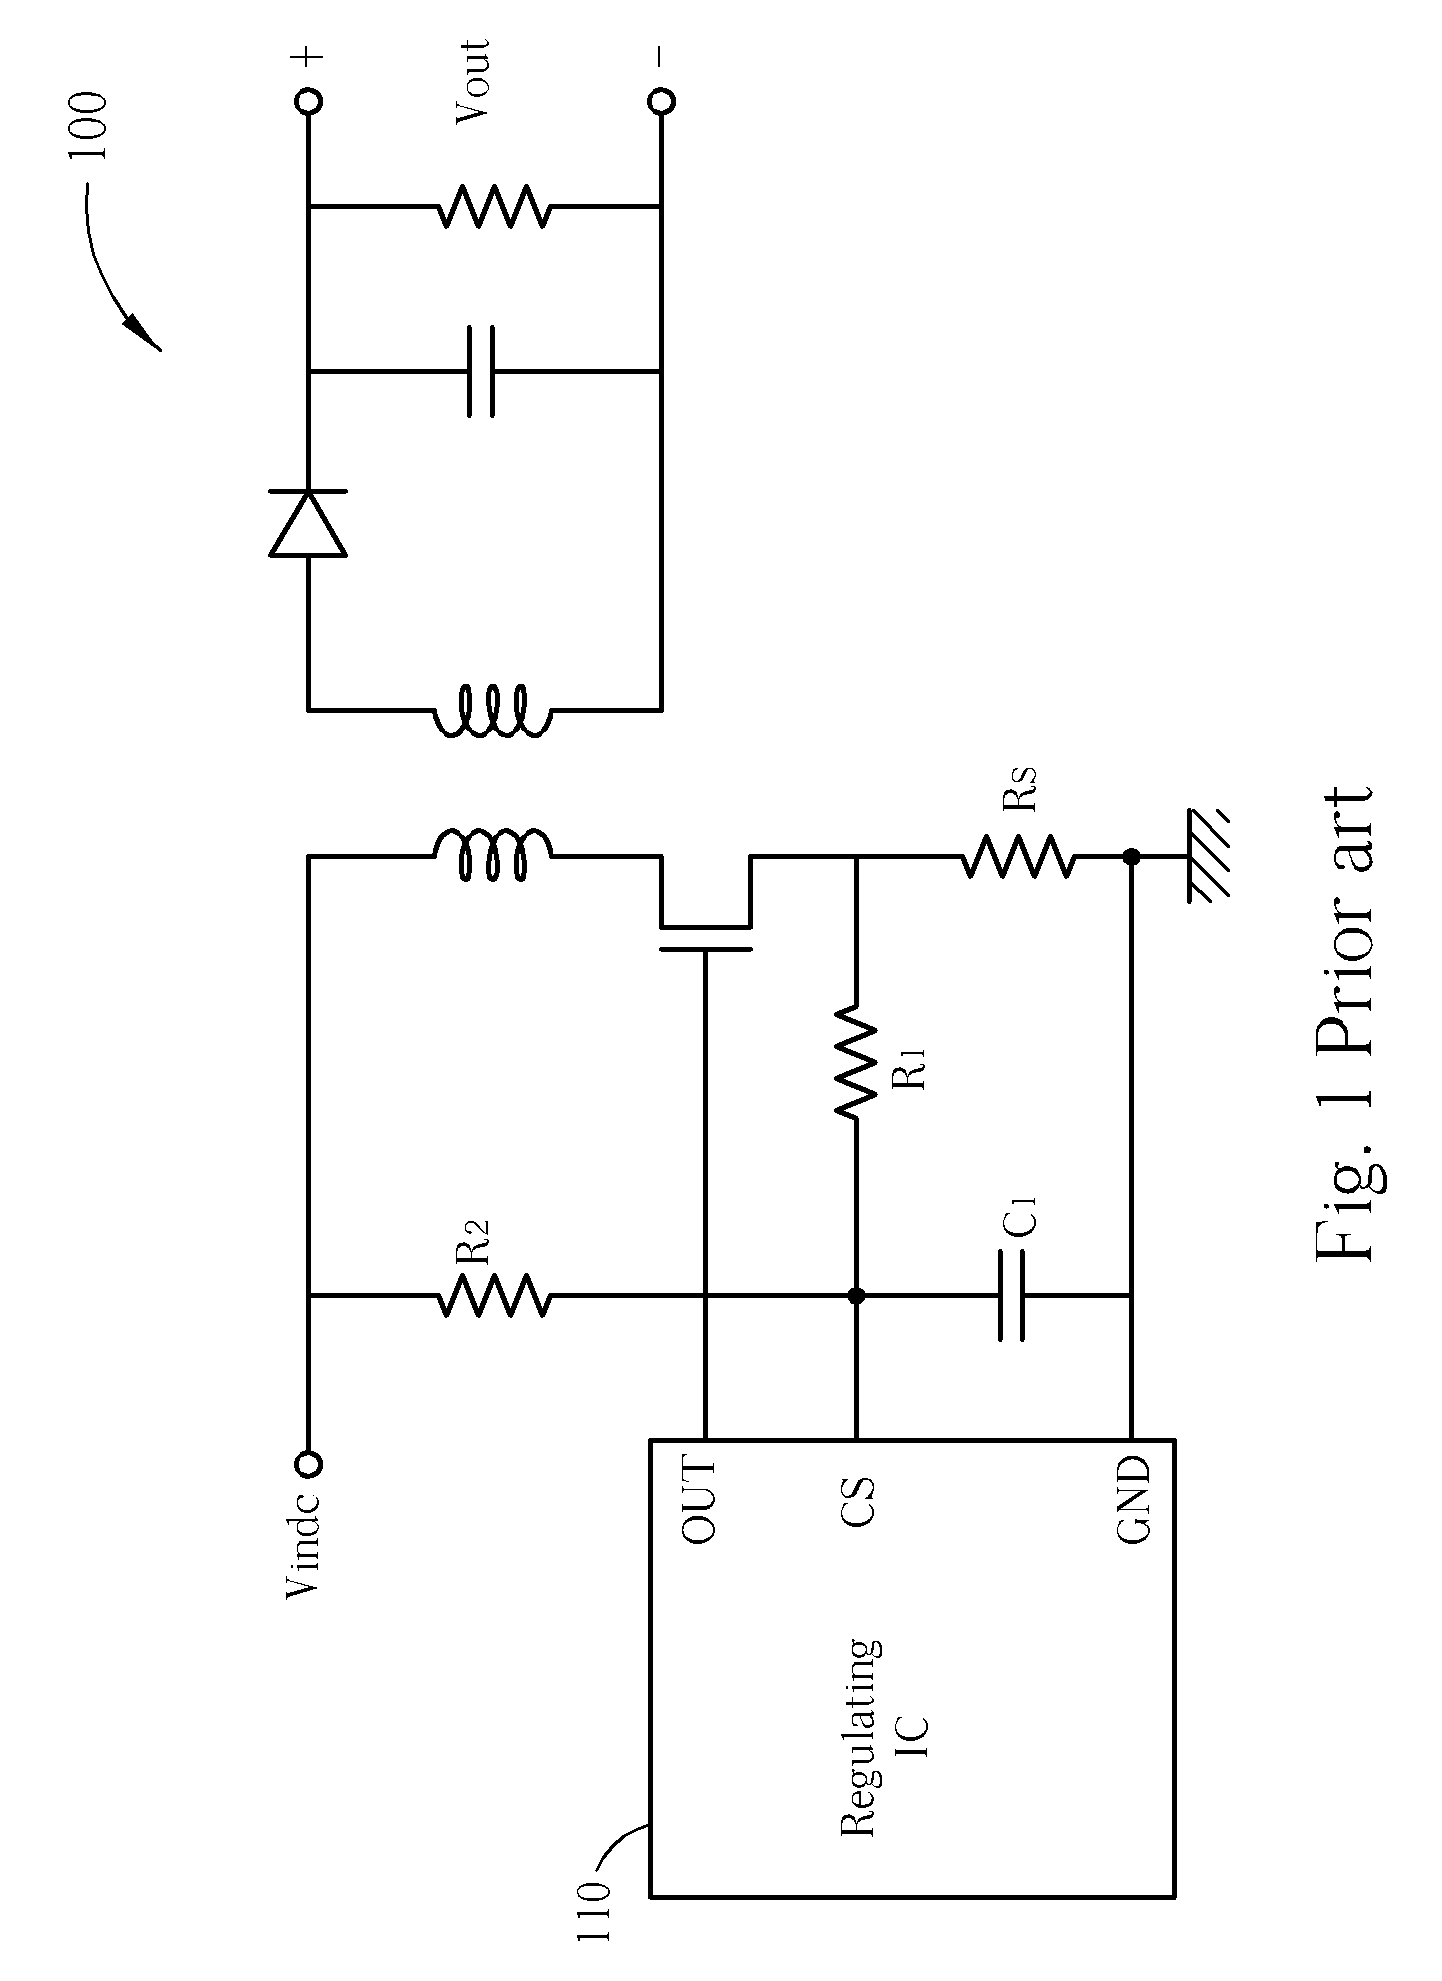 Adjustable over current protection circuit with low power loss